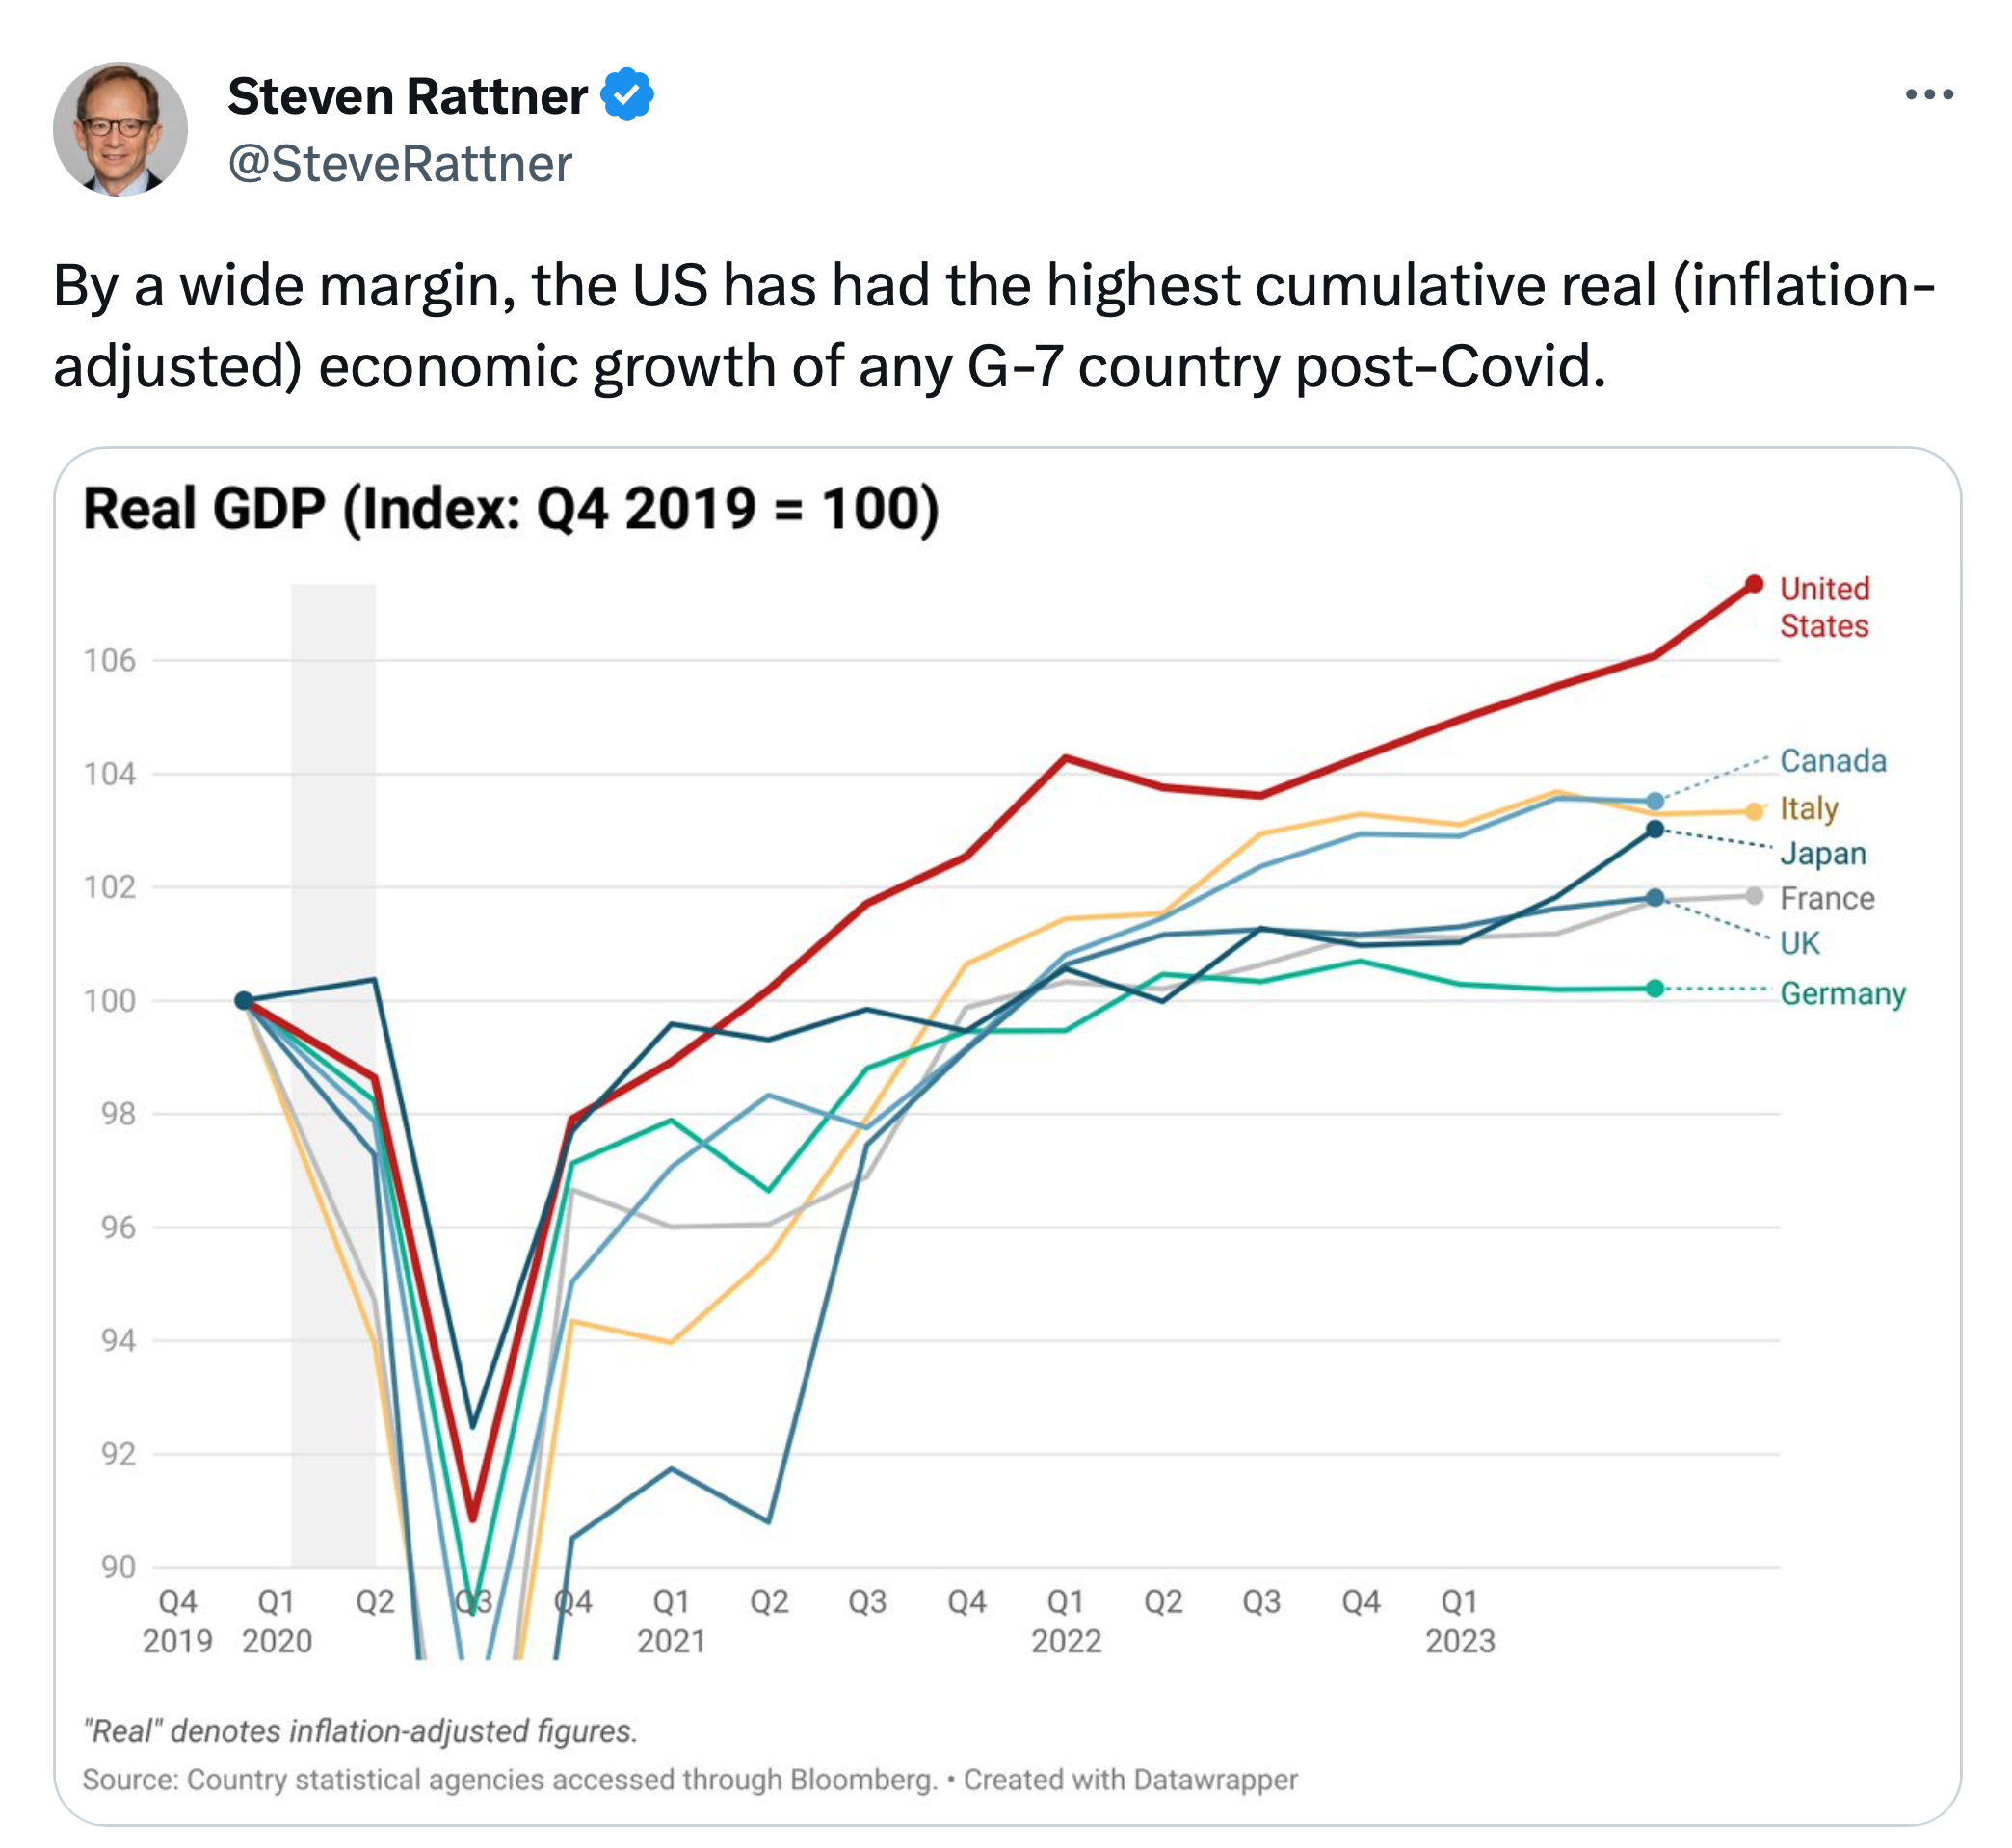 Real GDP (inflation-adjusted) chart for G7 countries